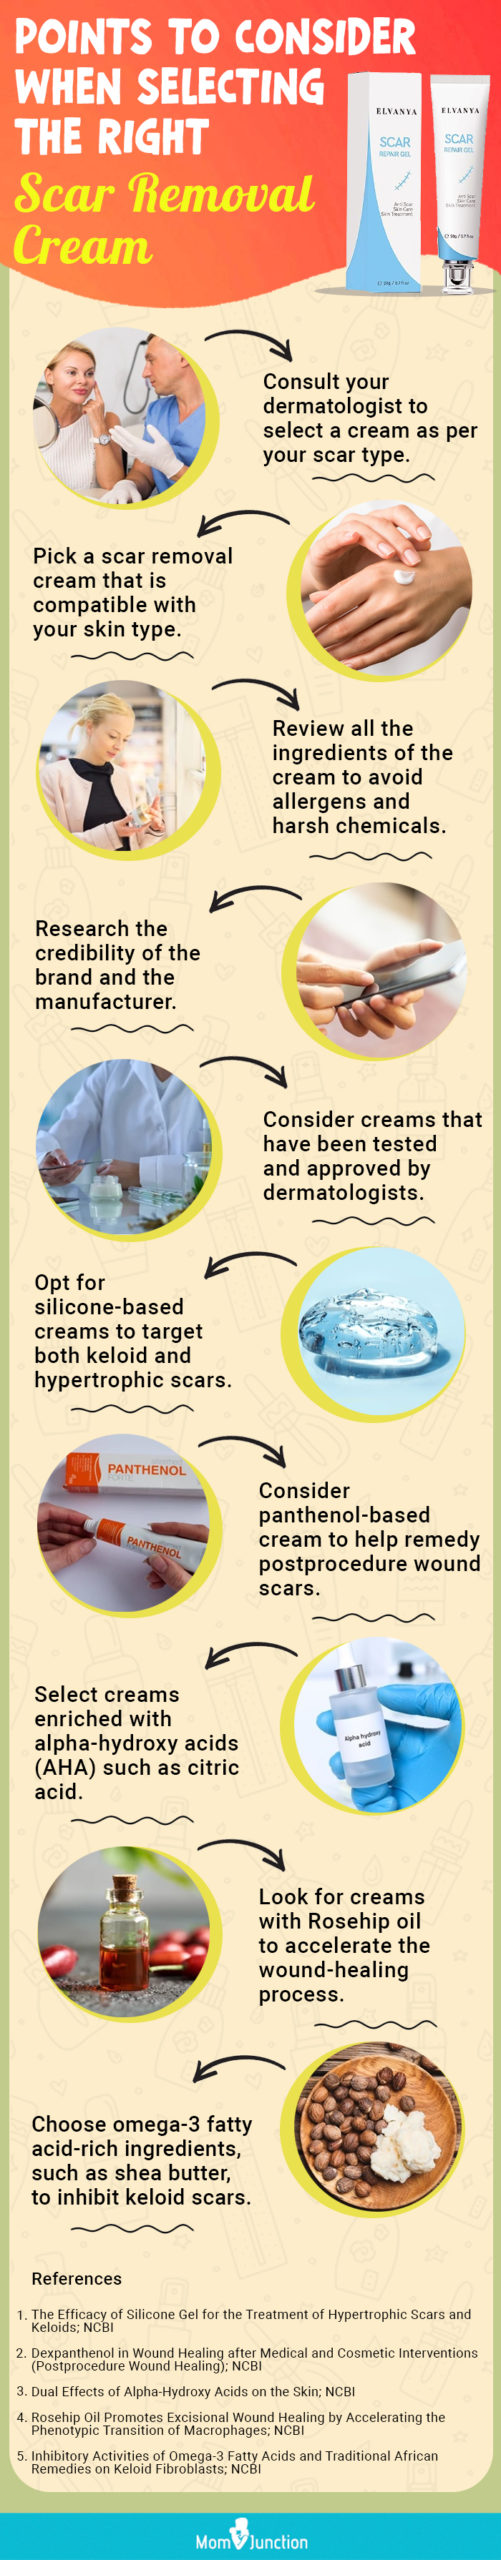 Points To Consider When Selecting The Right Scar Removal Cream (infographic)